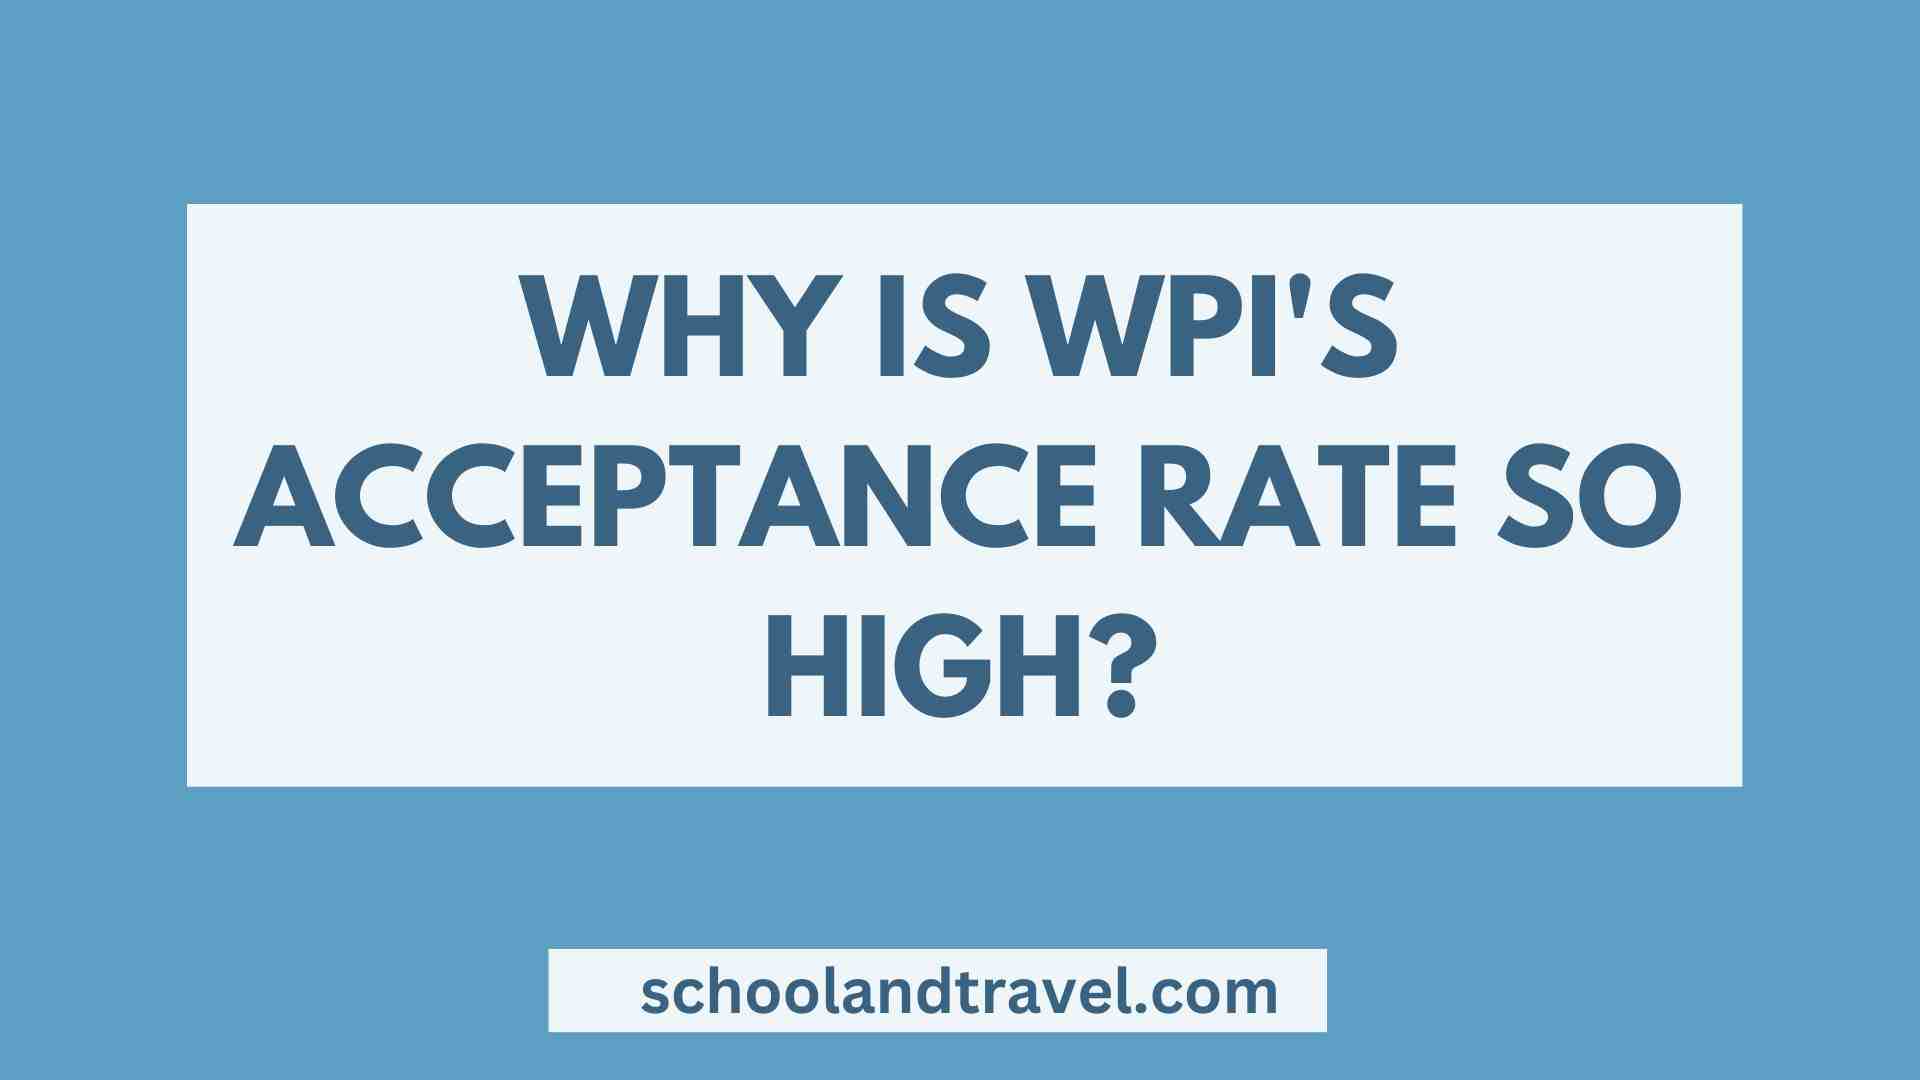 Why is WPI's Acceptance Rate so High?